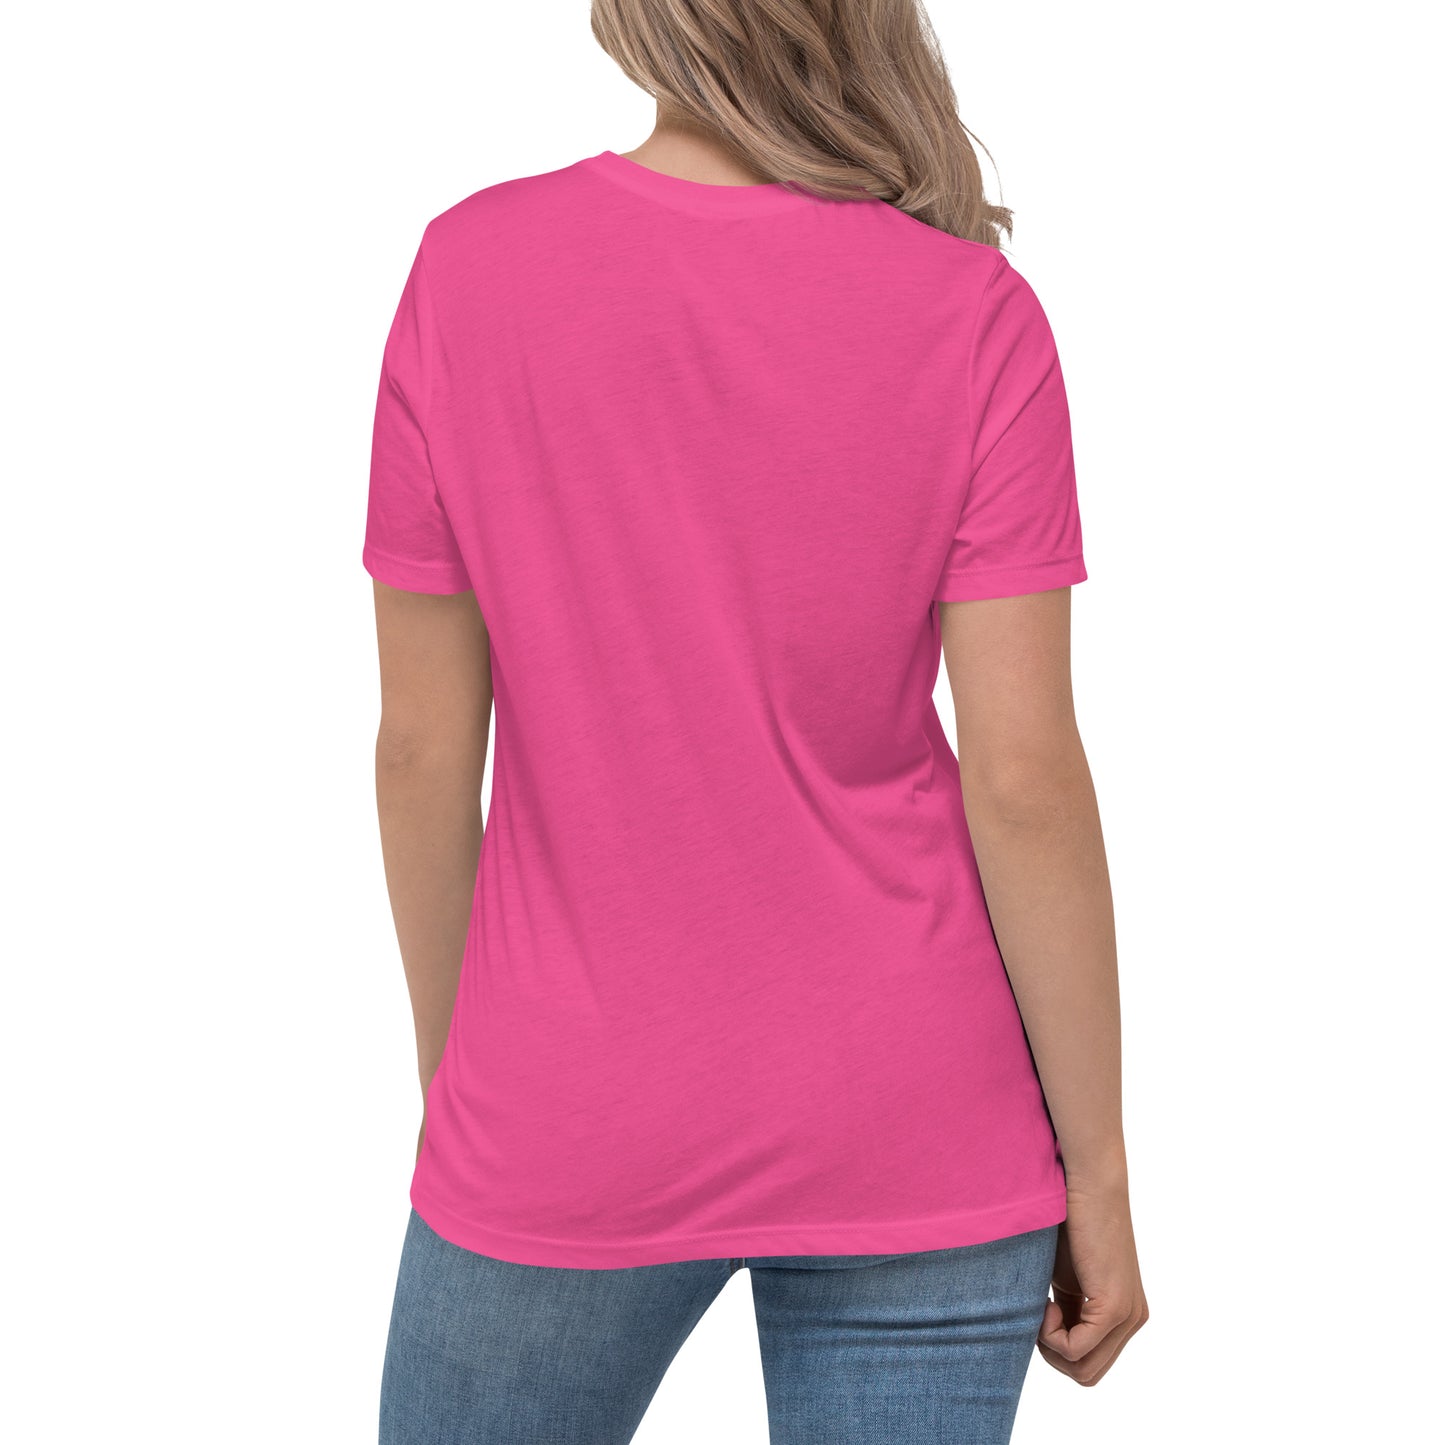 The Clean Living Project Women's Relaxed T-Shirt (waves)